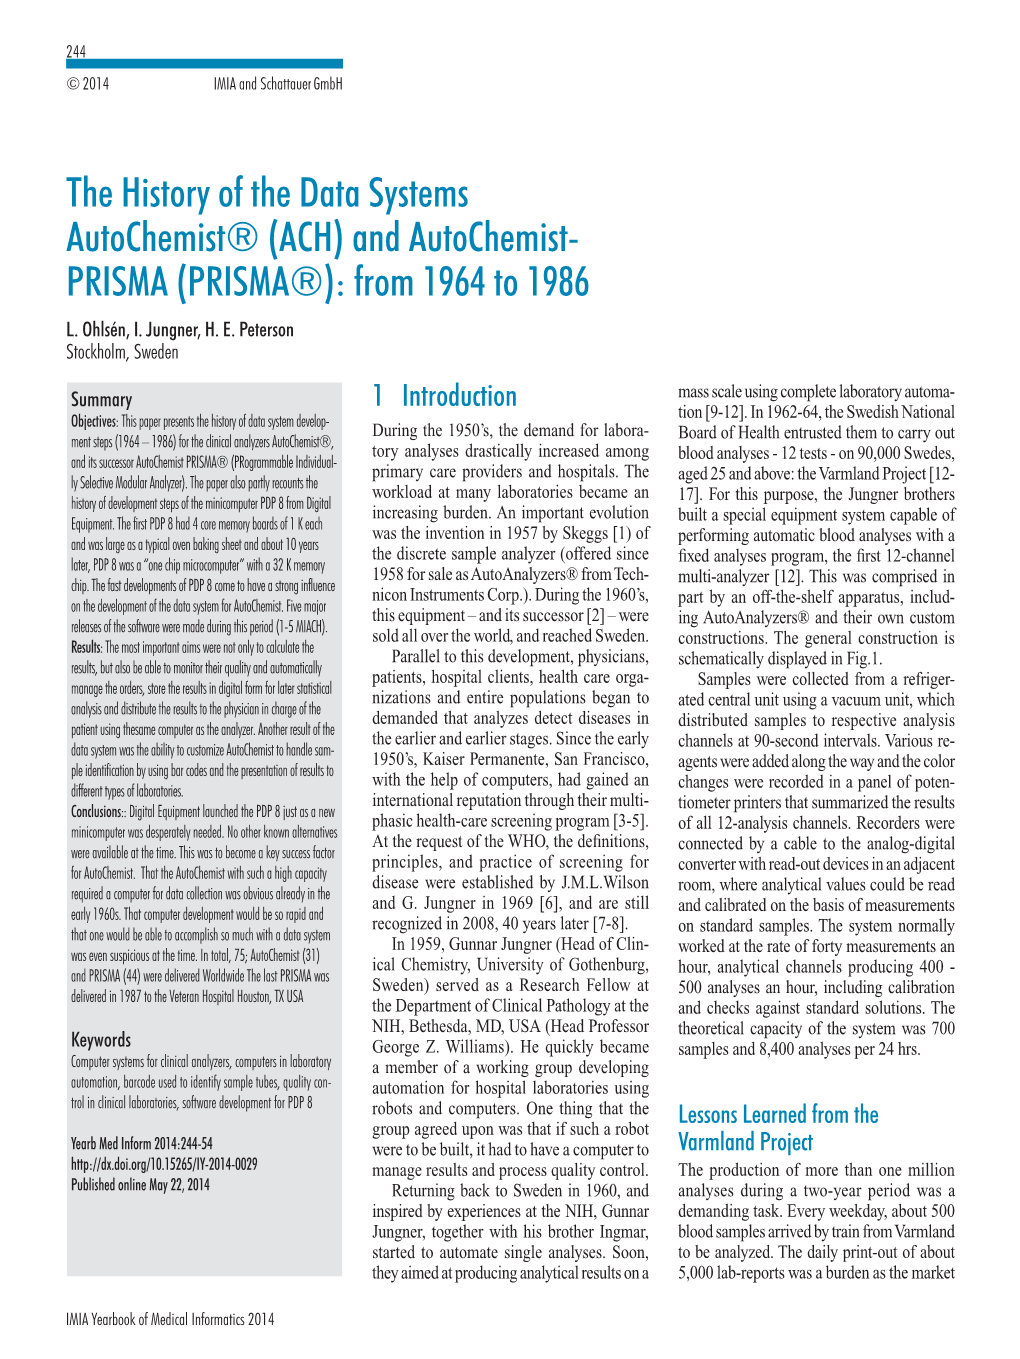 The History of the Data Systems Autochemistâ® (ACH) And